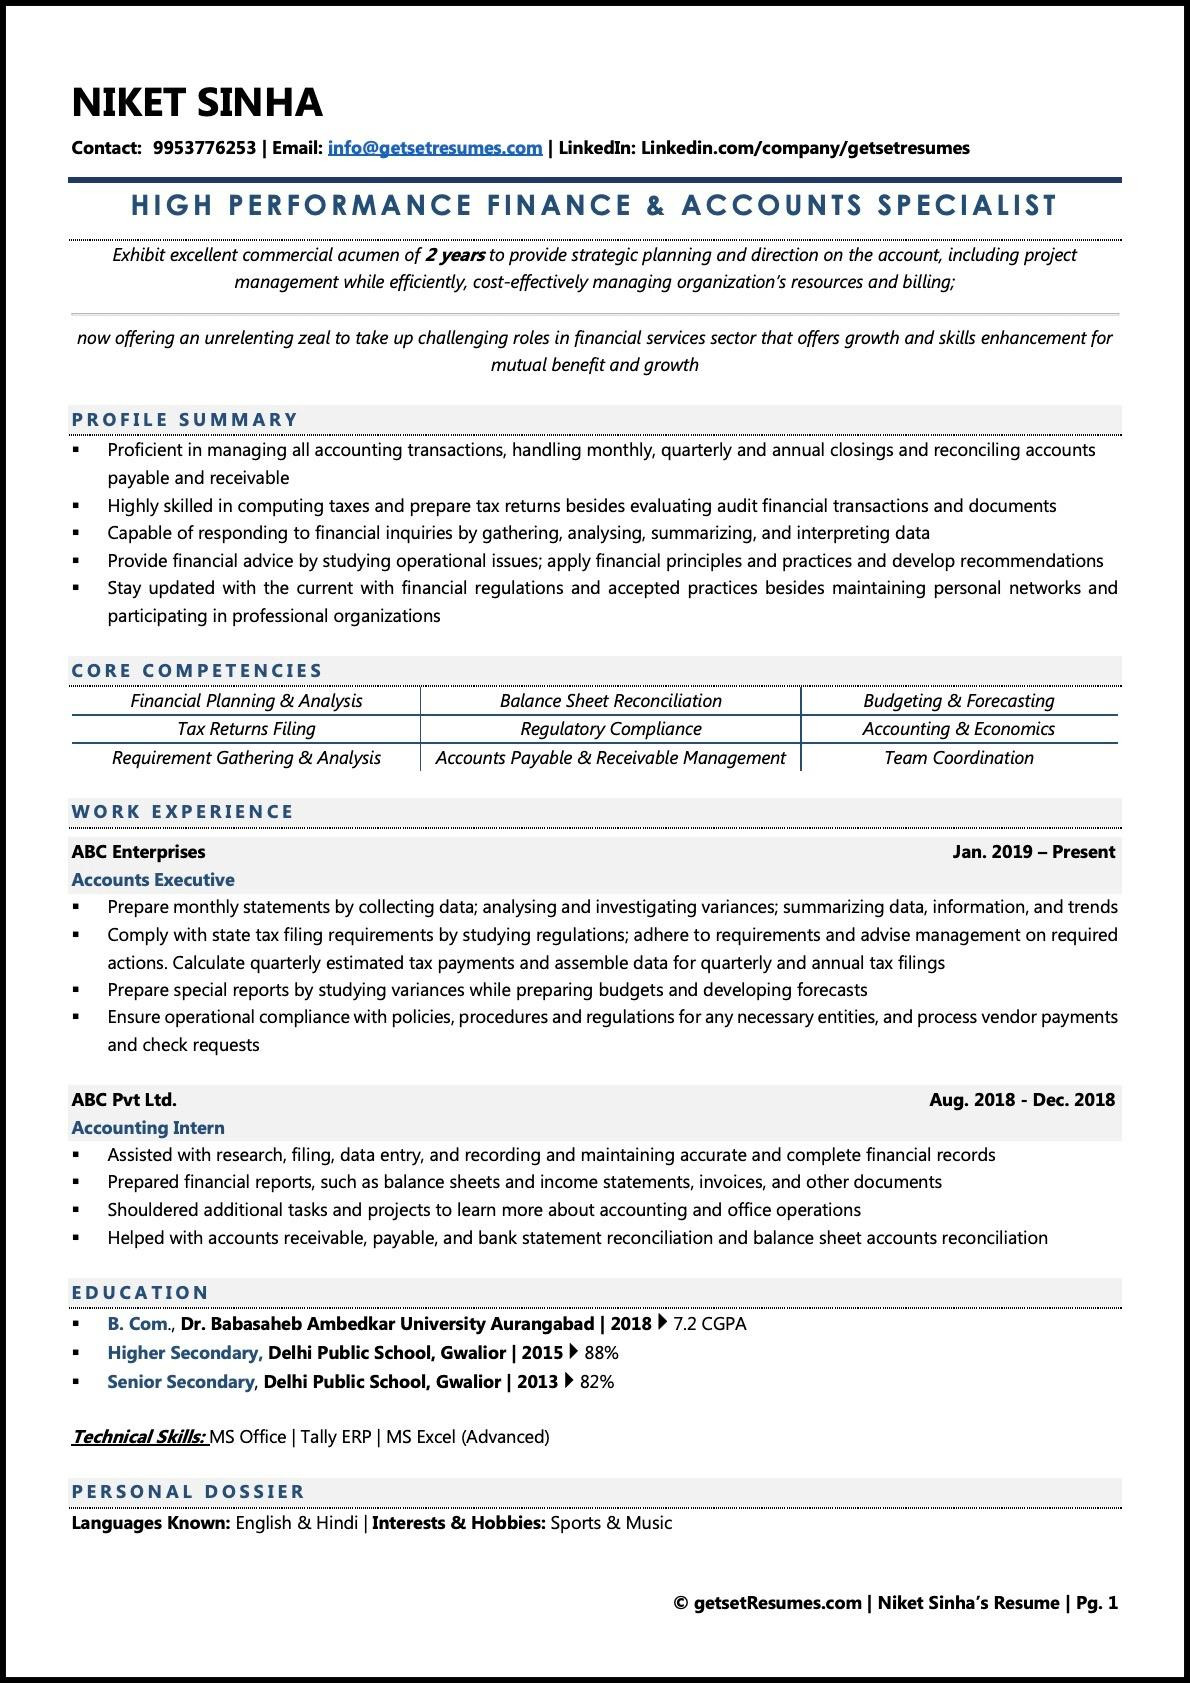 Sample Resume for Mutual Fund Operations In India Accounts Executive Resume Examples & Template (with Job Winning Tips)